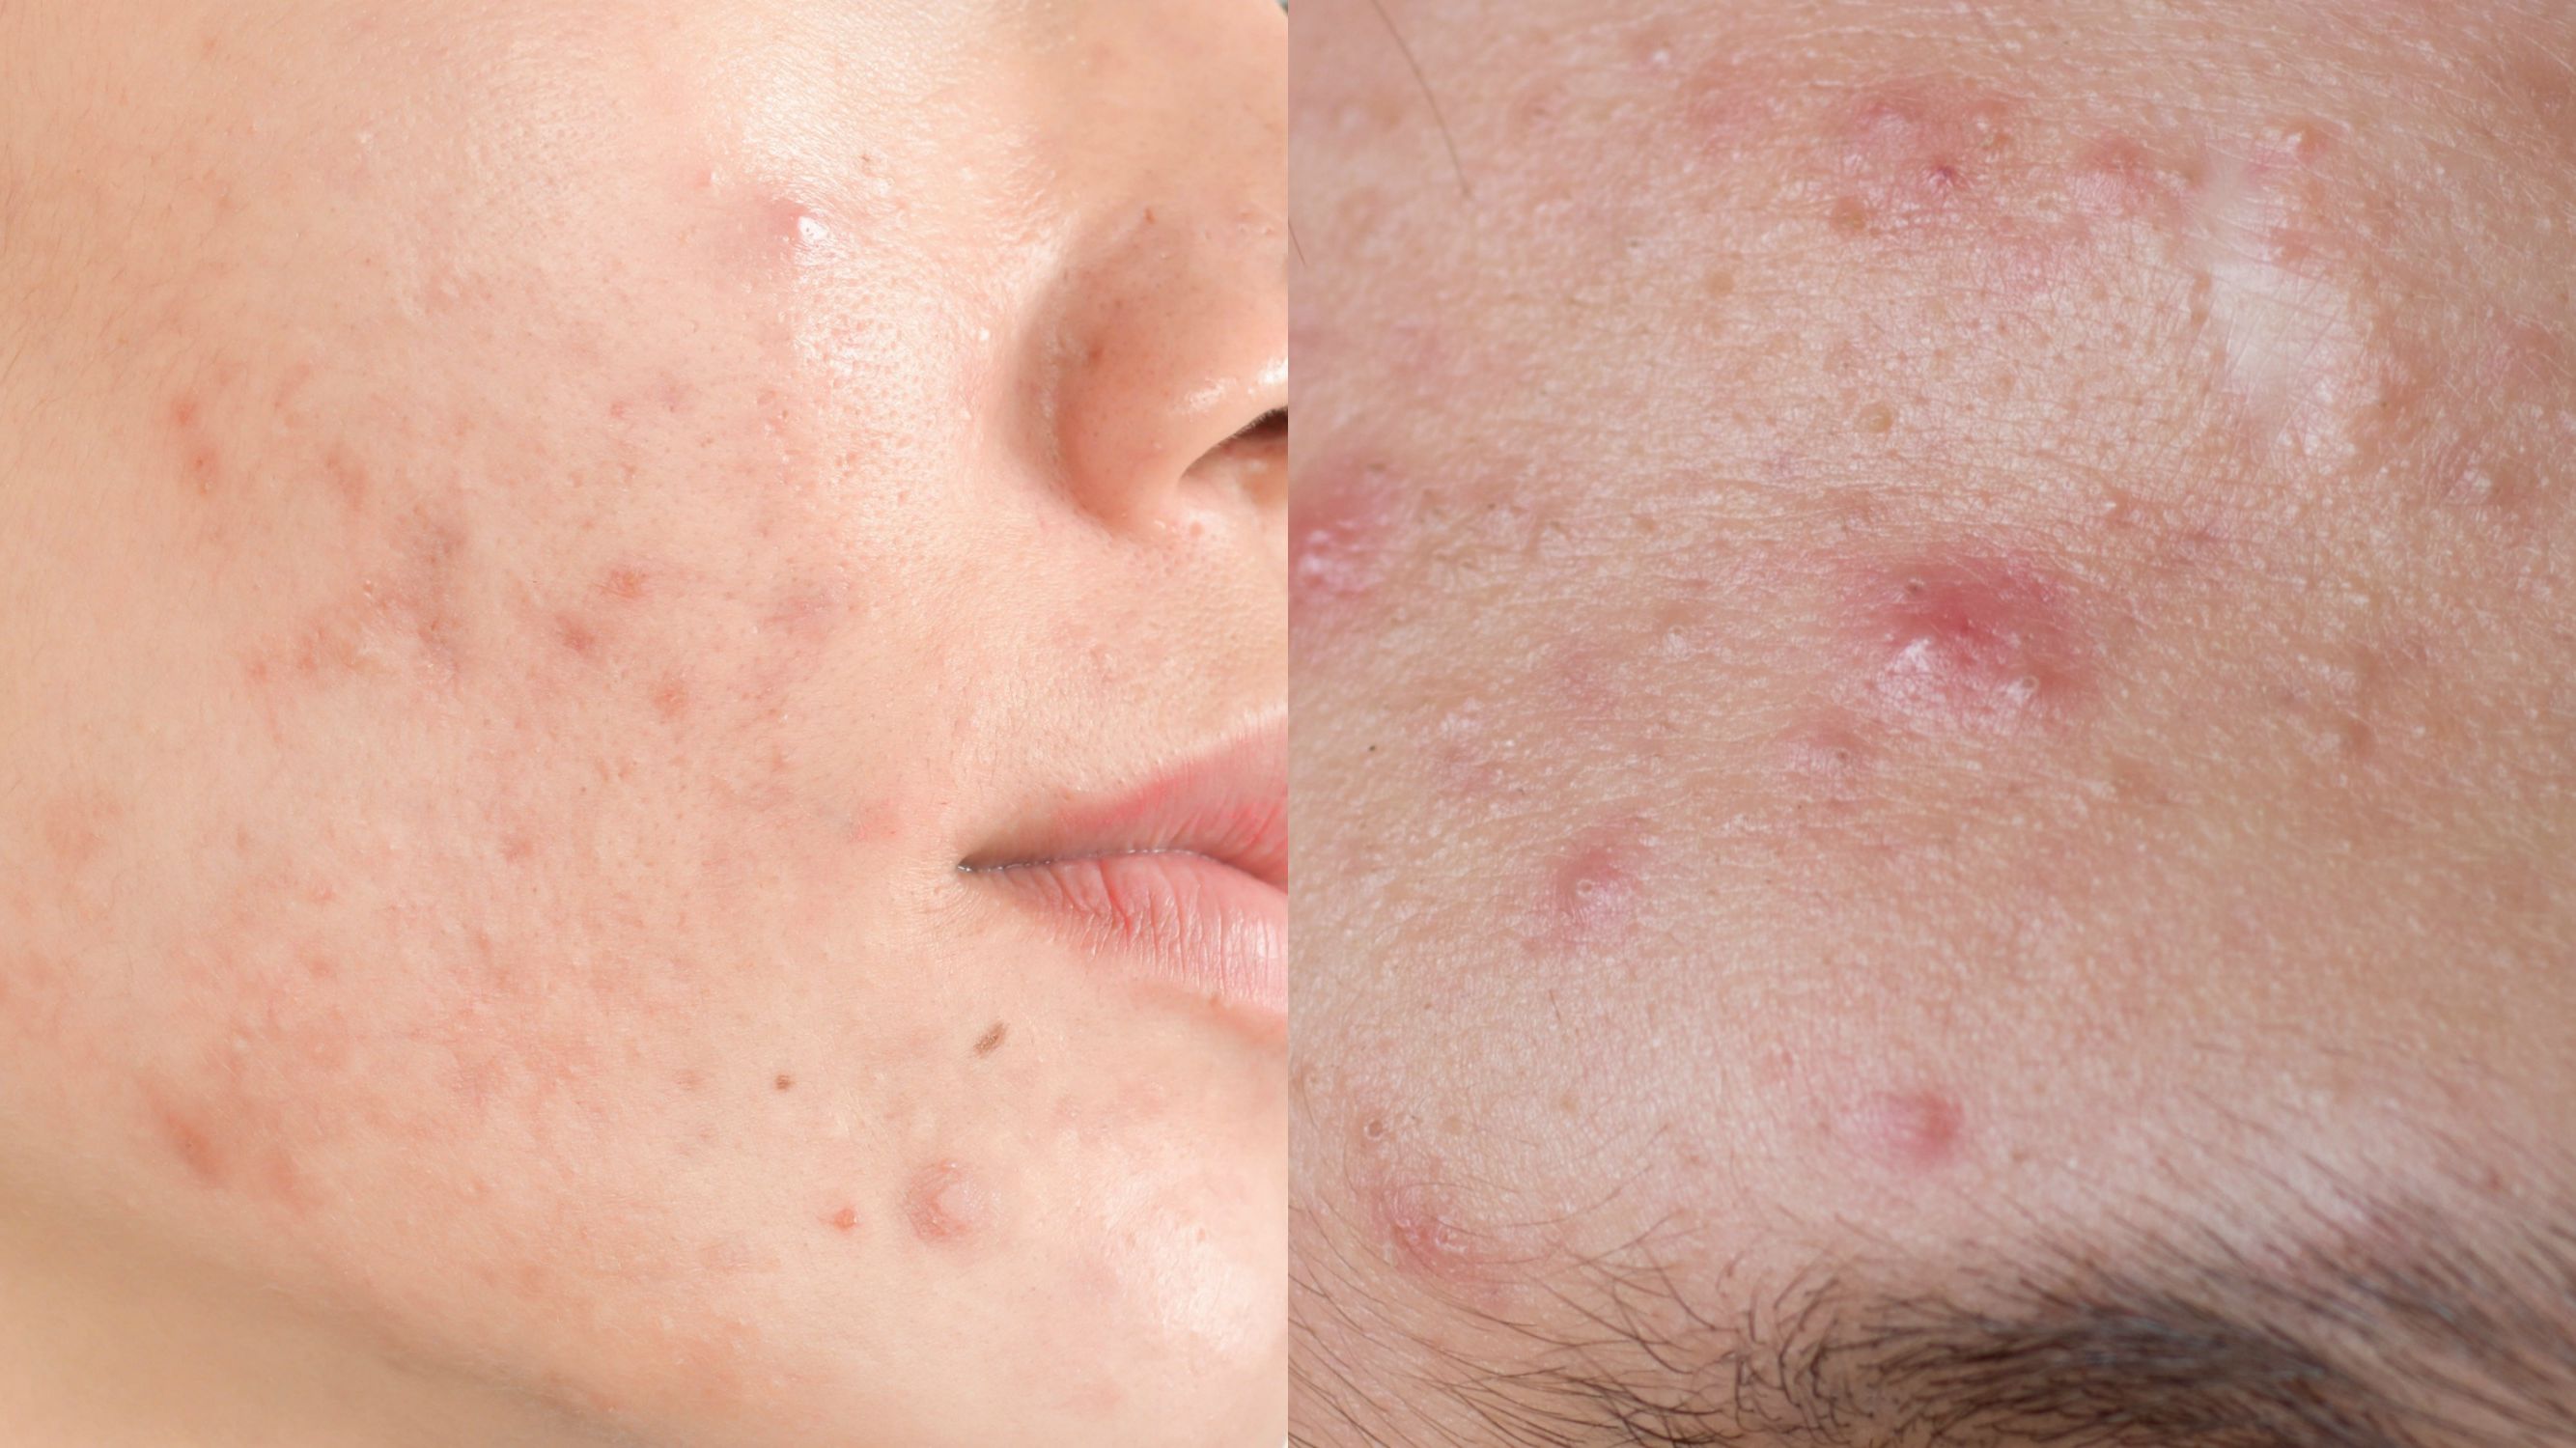 sadel aktivt Lad os gøre det 6 Adult Acne Causes and How to Get Rid of It, Say Dermatologists